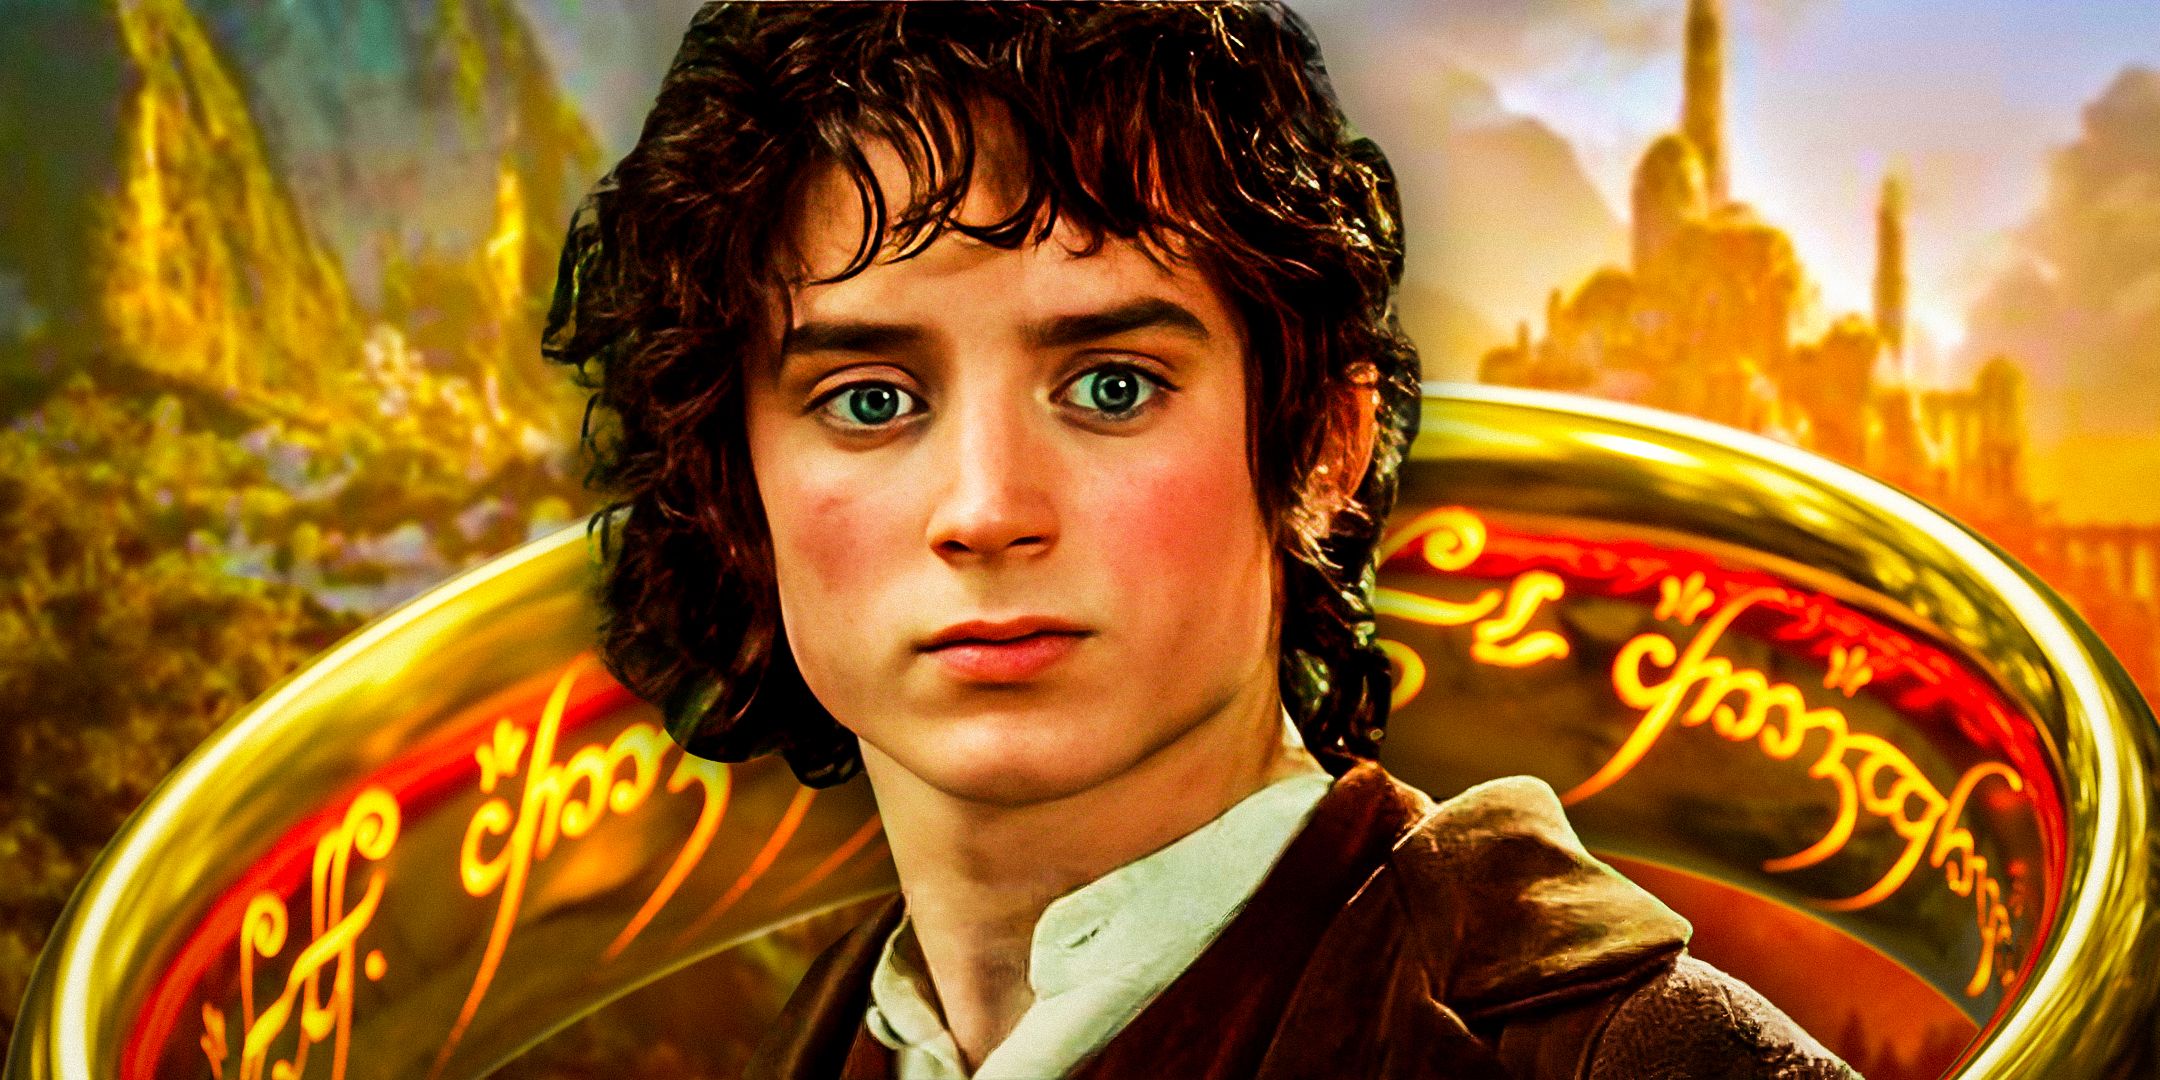 Frodo-from-The-Lord-of-the-Rings-The-Fellowship-of-the-Ring-